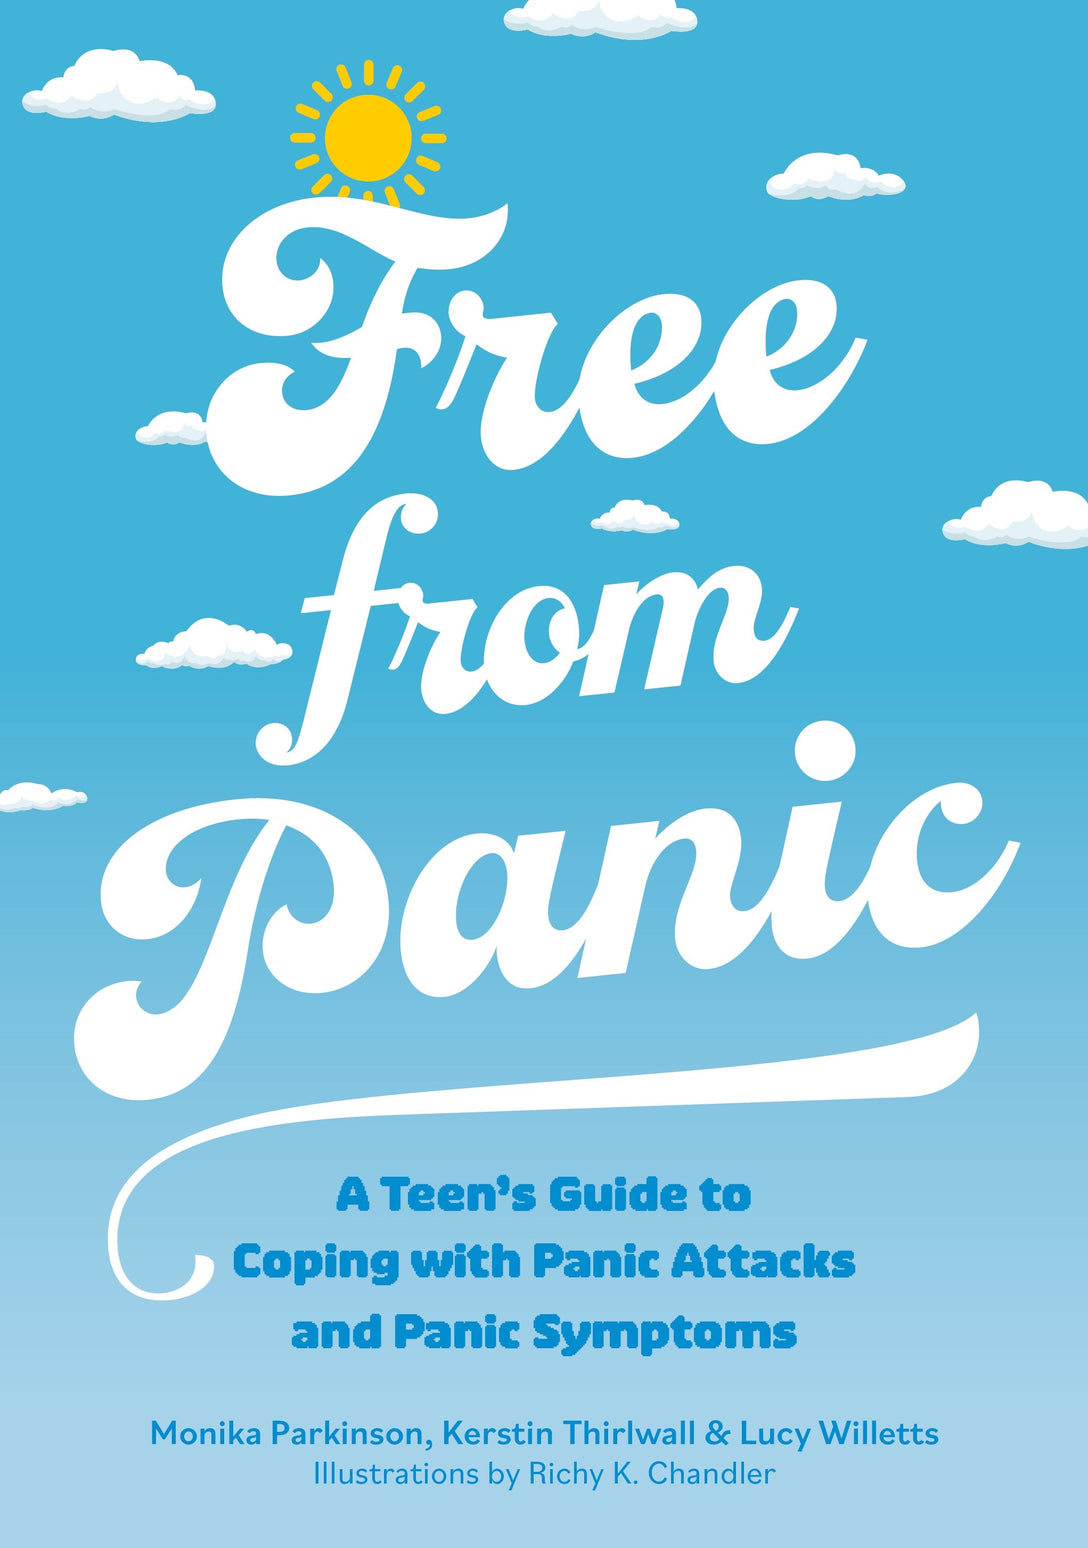 Free from Panic by Monika Parkinson, Kerstin Thirlwall, Lucy Willetts, Richy K. Chandler